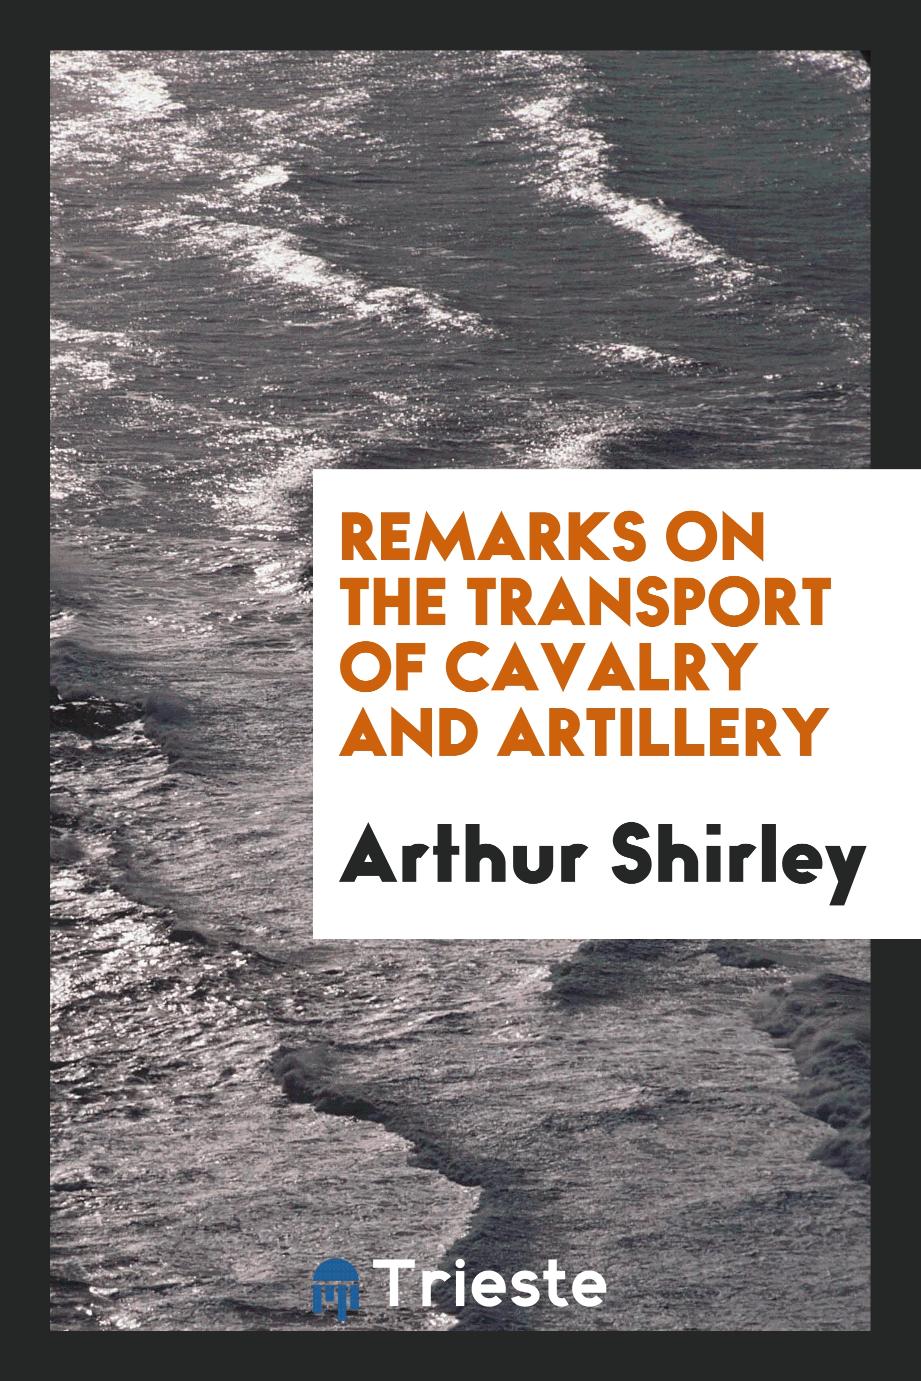 Remarks on the transport of cavalry and artillery